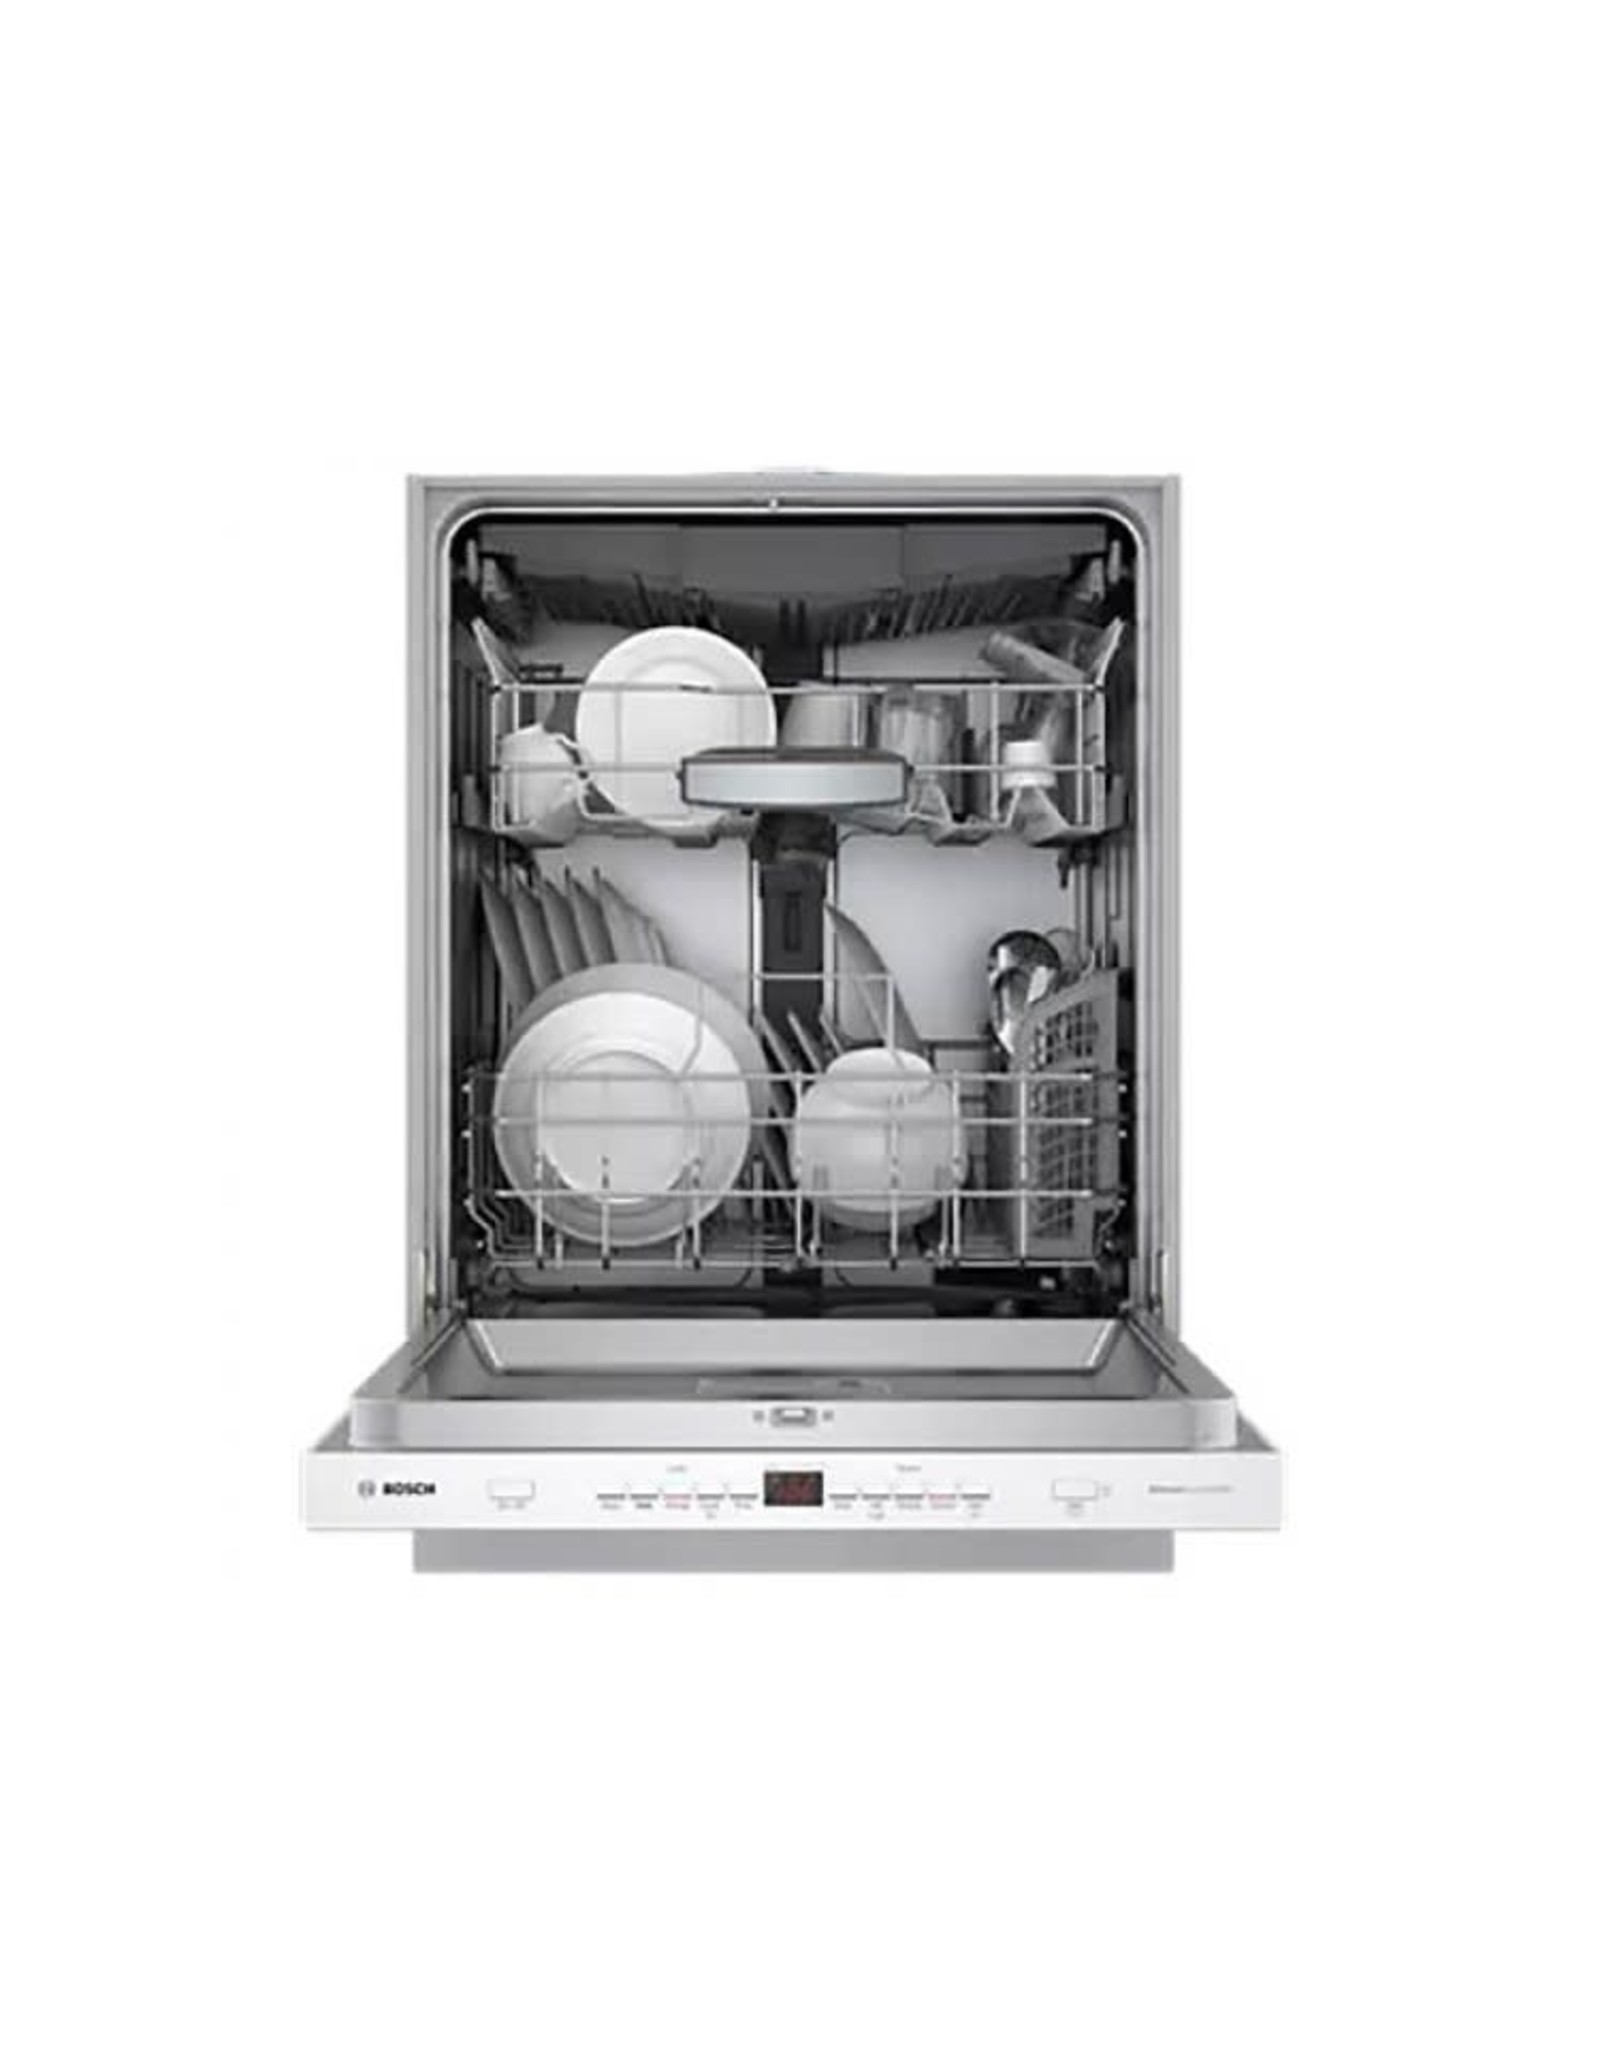 BOSCH SHPM65Z52N Bosch 500 Series Top Control Tall Tub Pocket Handle Dishwasher in White with Stainless Steel Tub, AutoAir, 44dBA